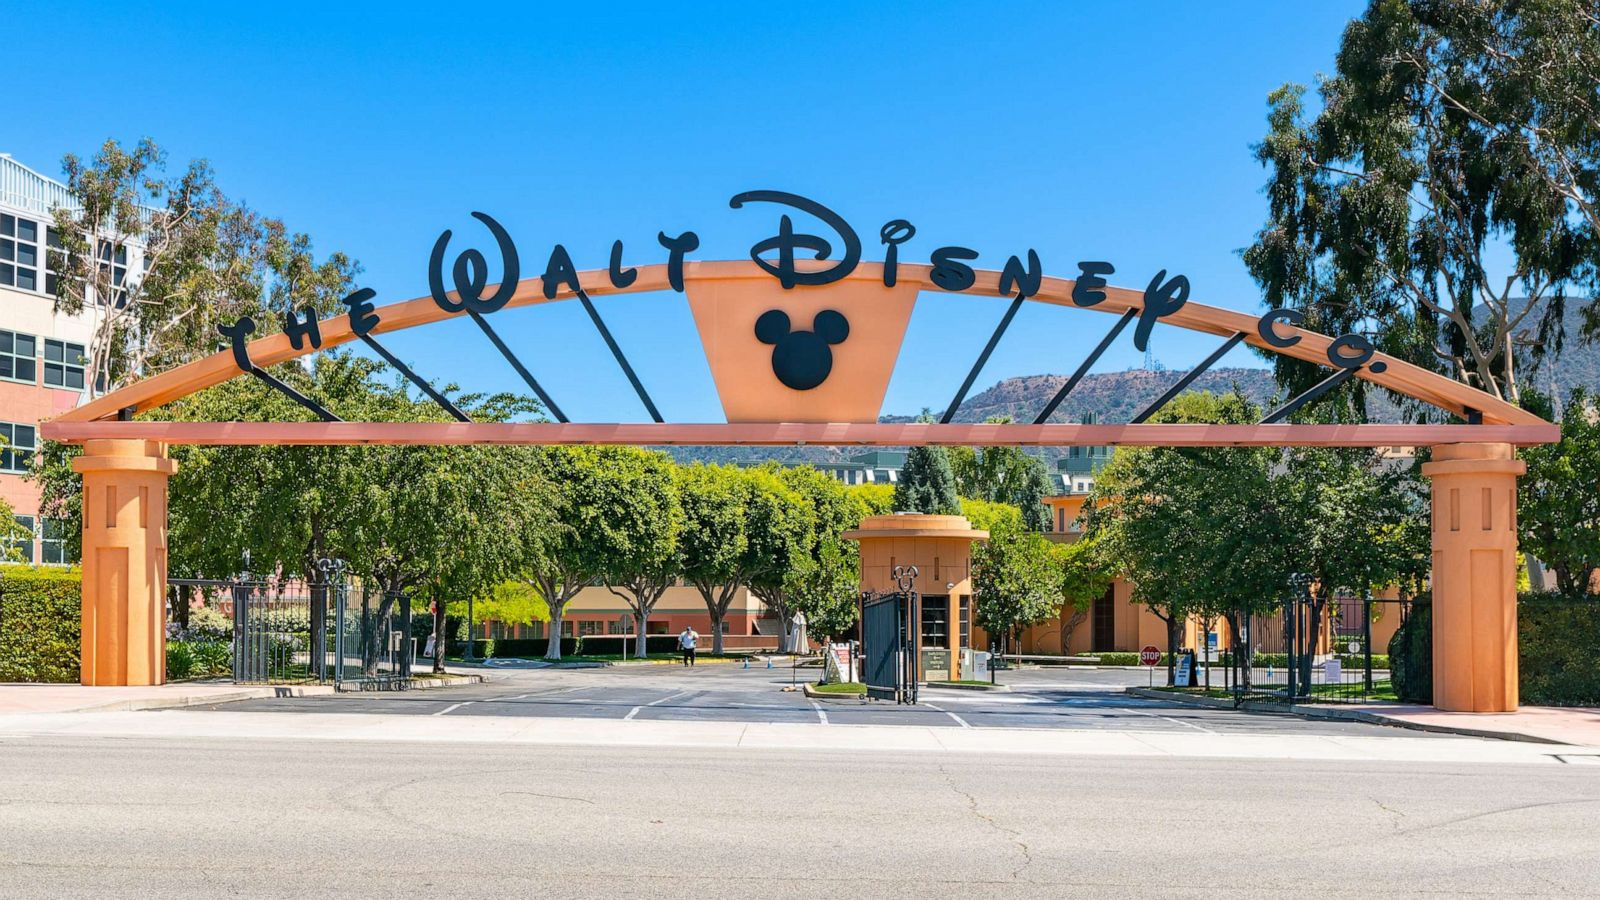 Walt Disney Company to eliminate plastic straws and more by 2019 - ABC News